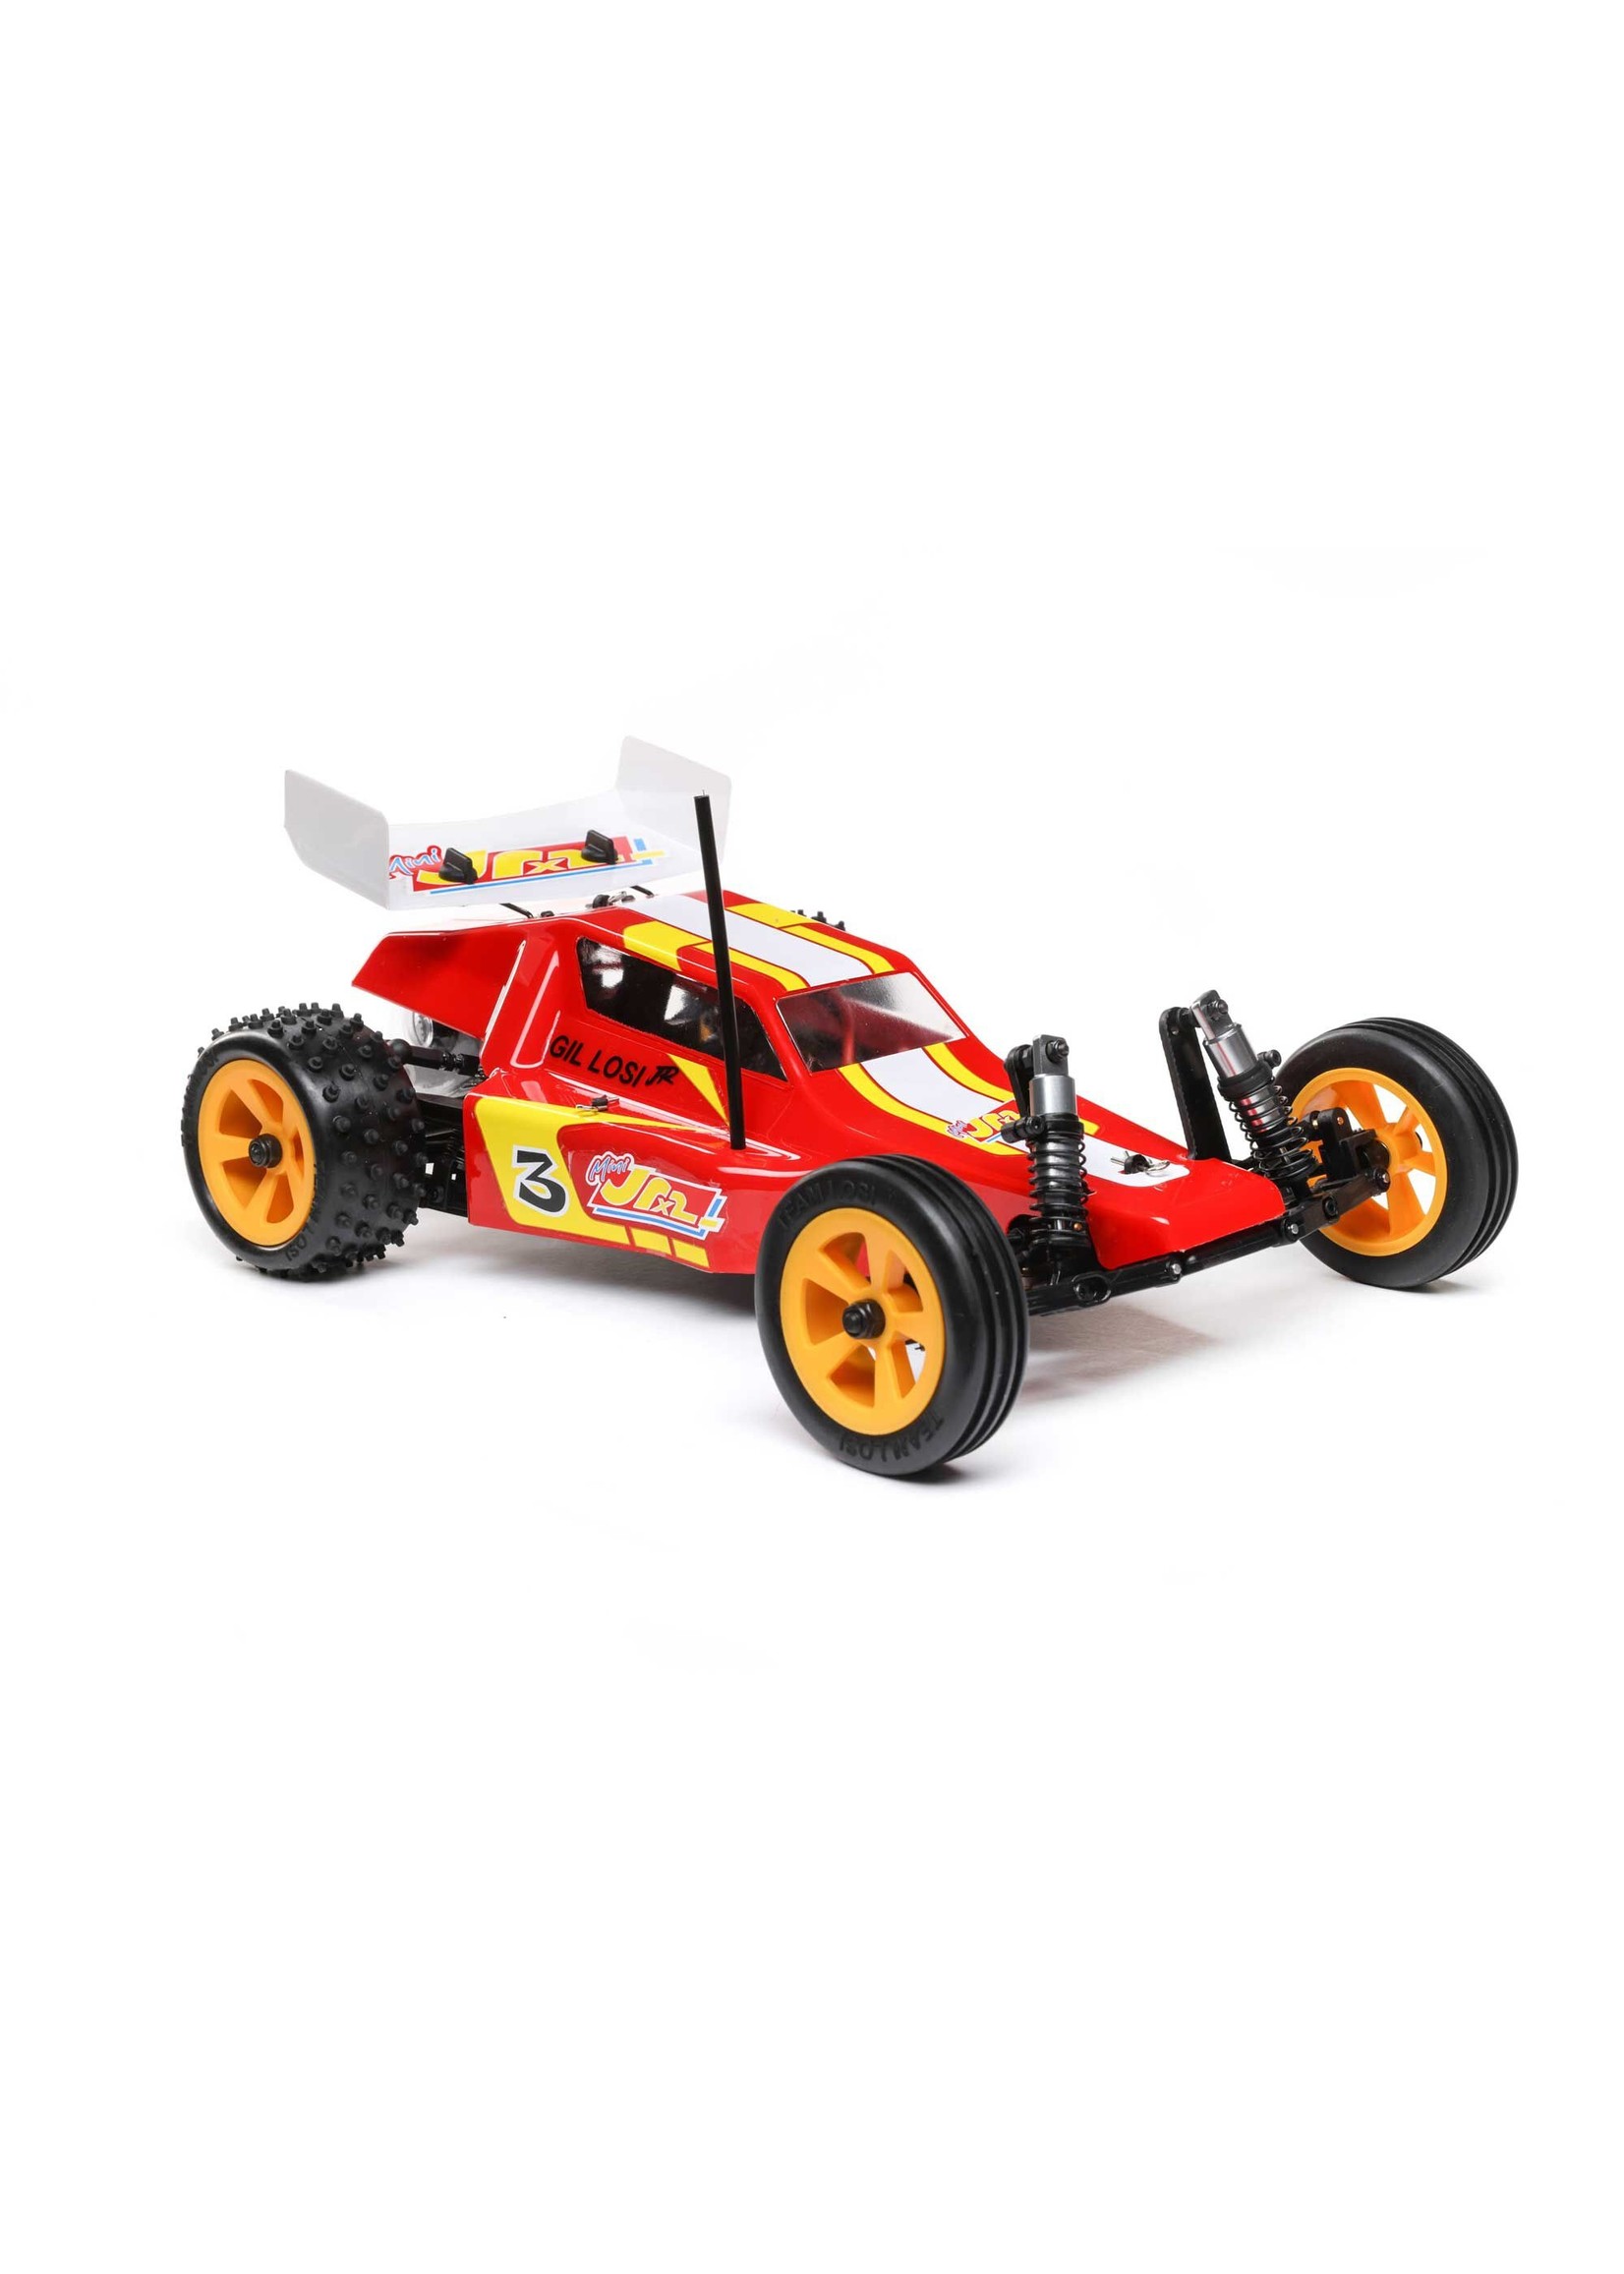 Losi 1/16 Mini JRX2 2WD Buggy Brushed RTR - Red